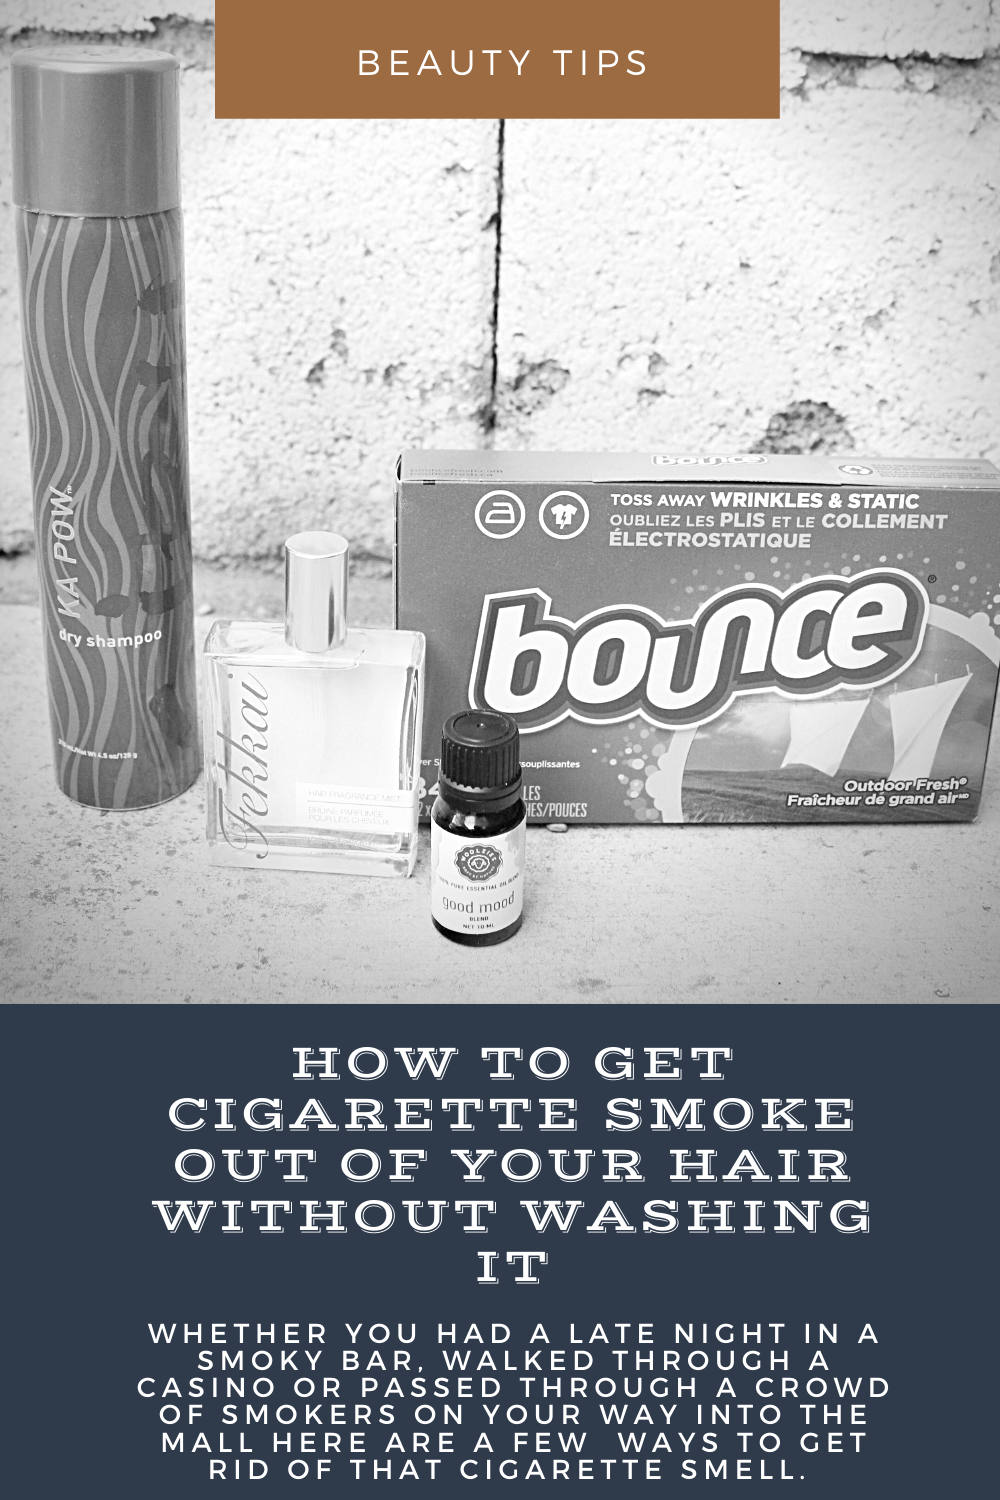 How to get cigarette smoke out of your hair